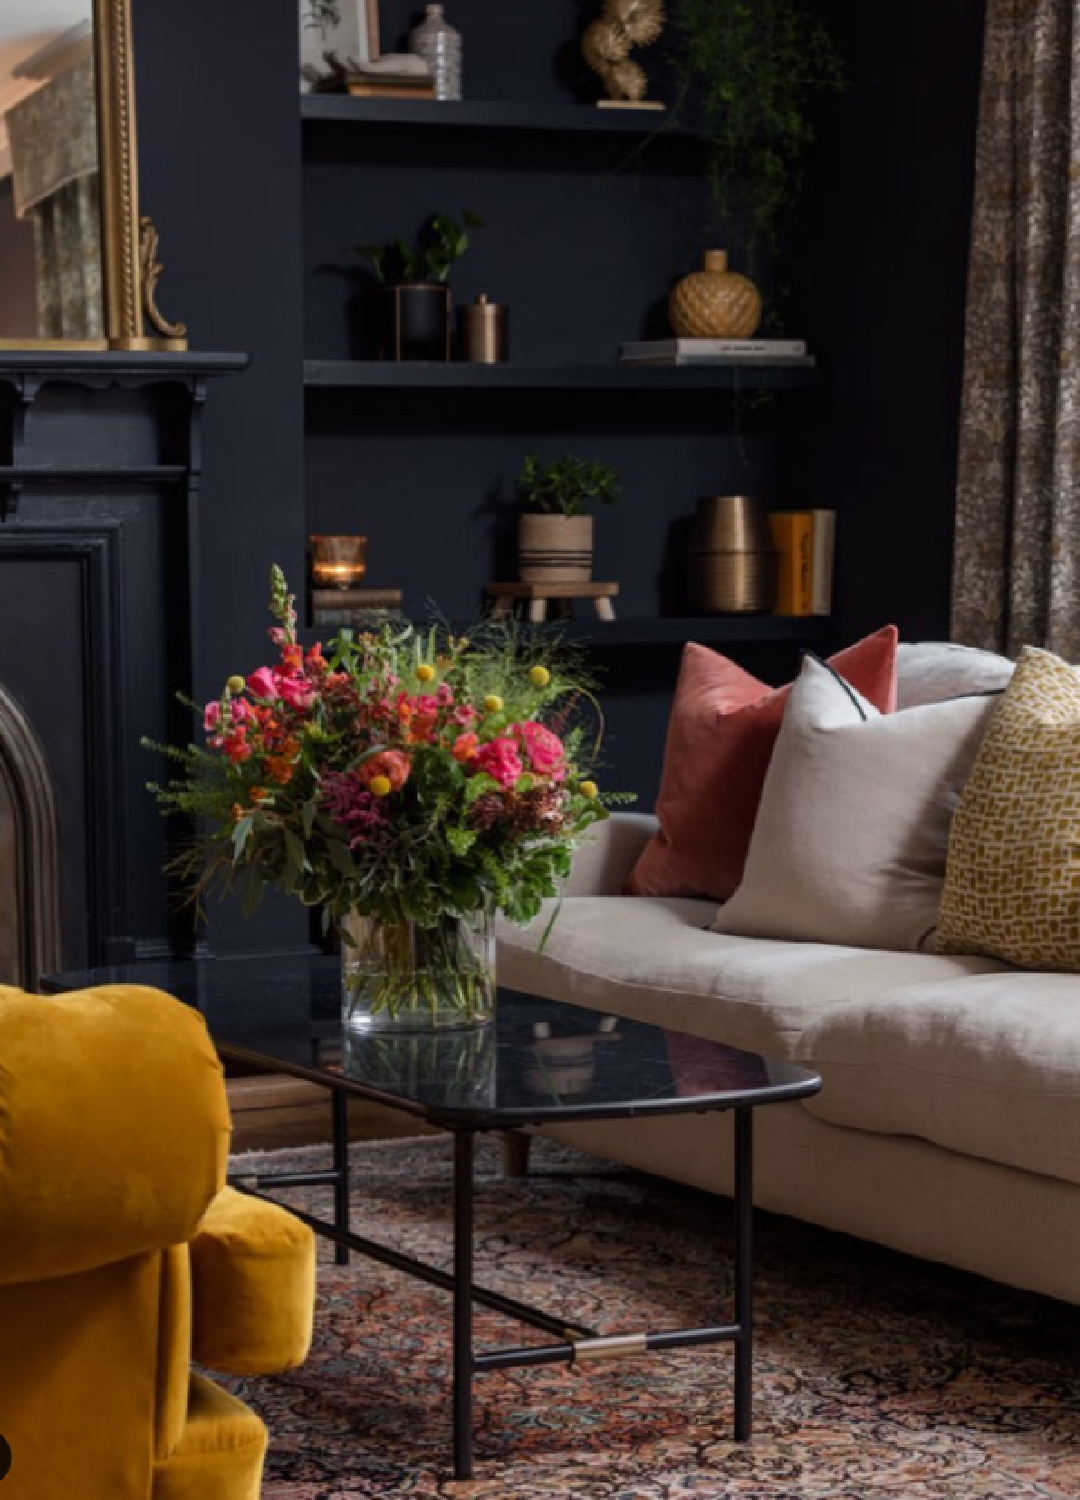 Farrow & Ball Railings black paint color in an English living room with fireplace - @tornandcottoninteriors. #railings #blackpaintcolors